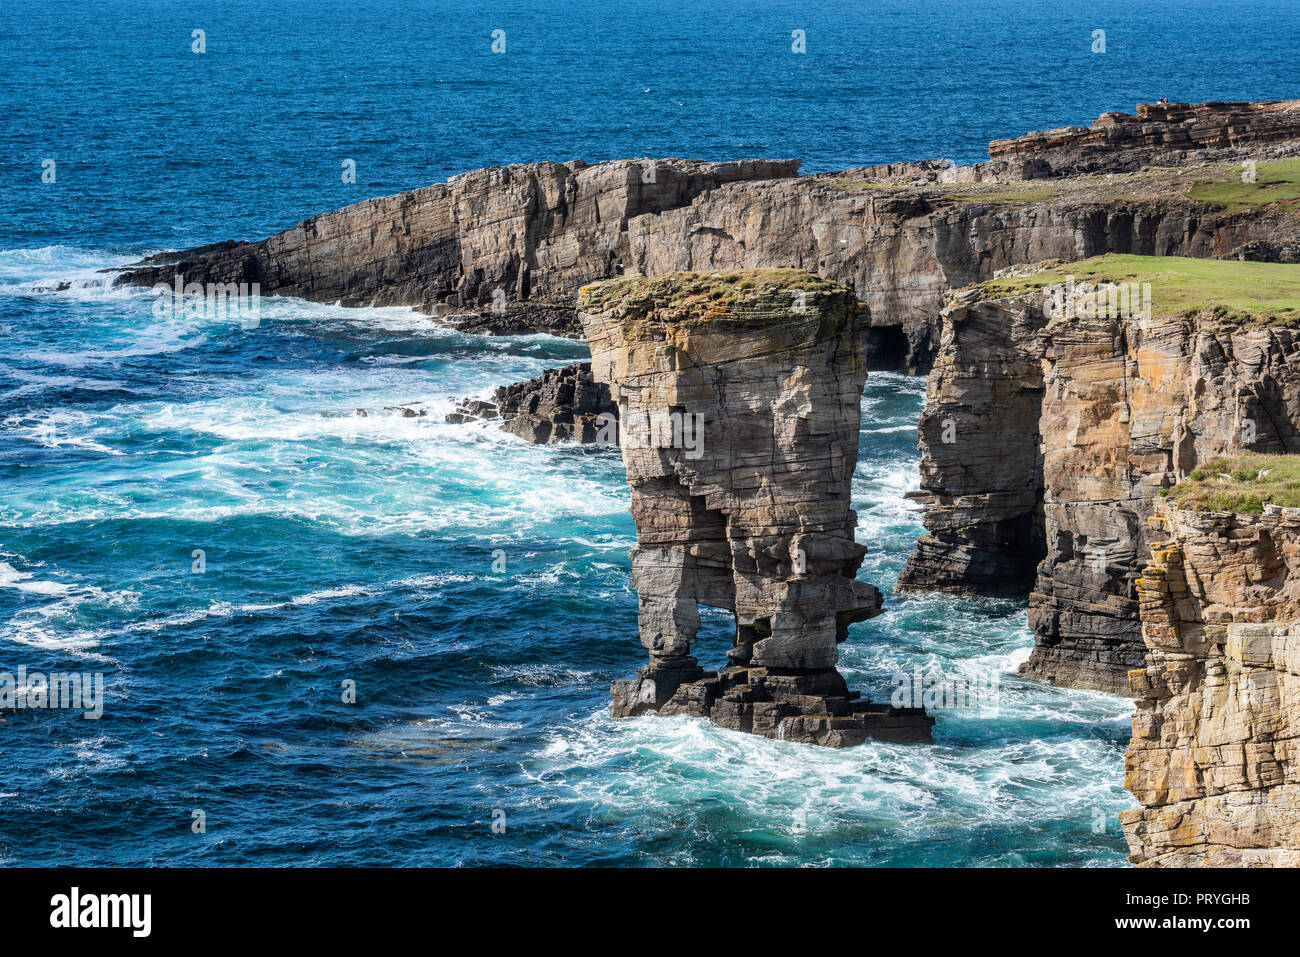 The 35m high surf pillar, called Yesnaby Castle, Sandwick, Mainland, Orkney Islands, Scotland, Great Britain Stock Photo